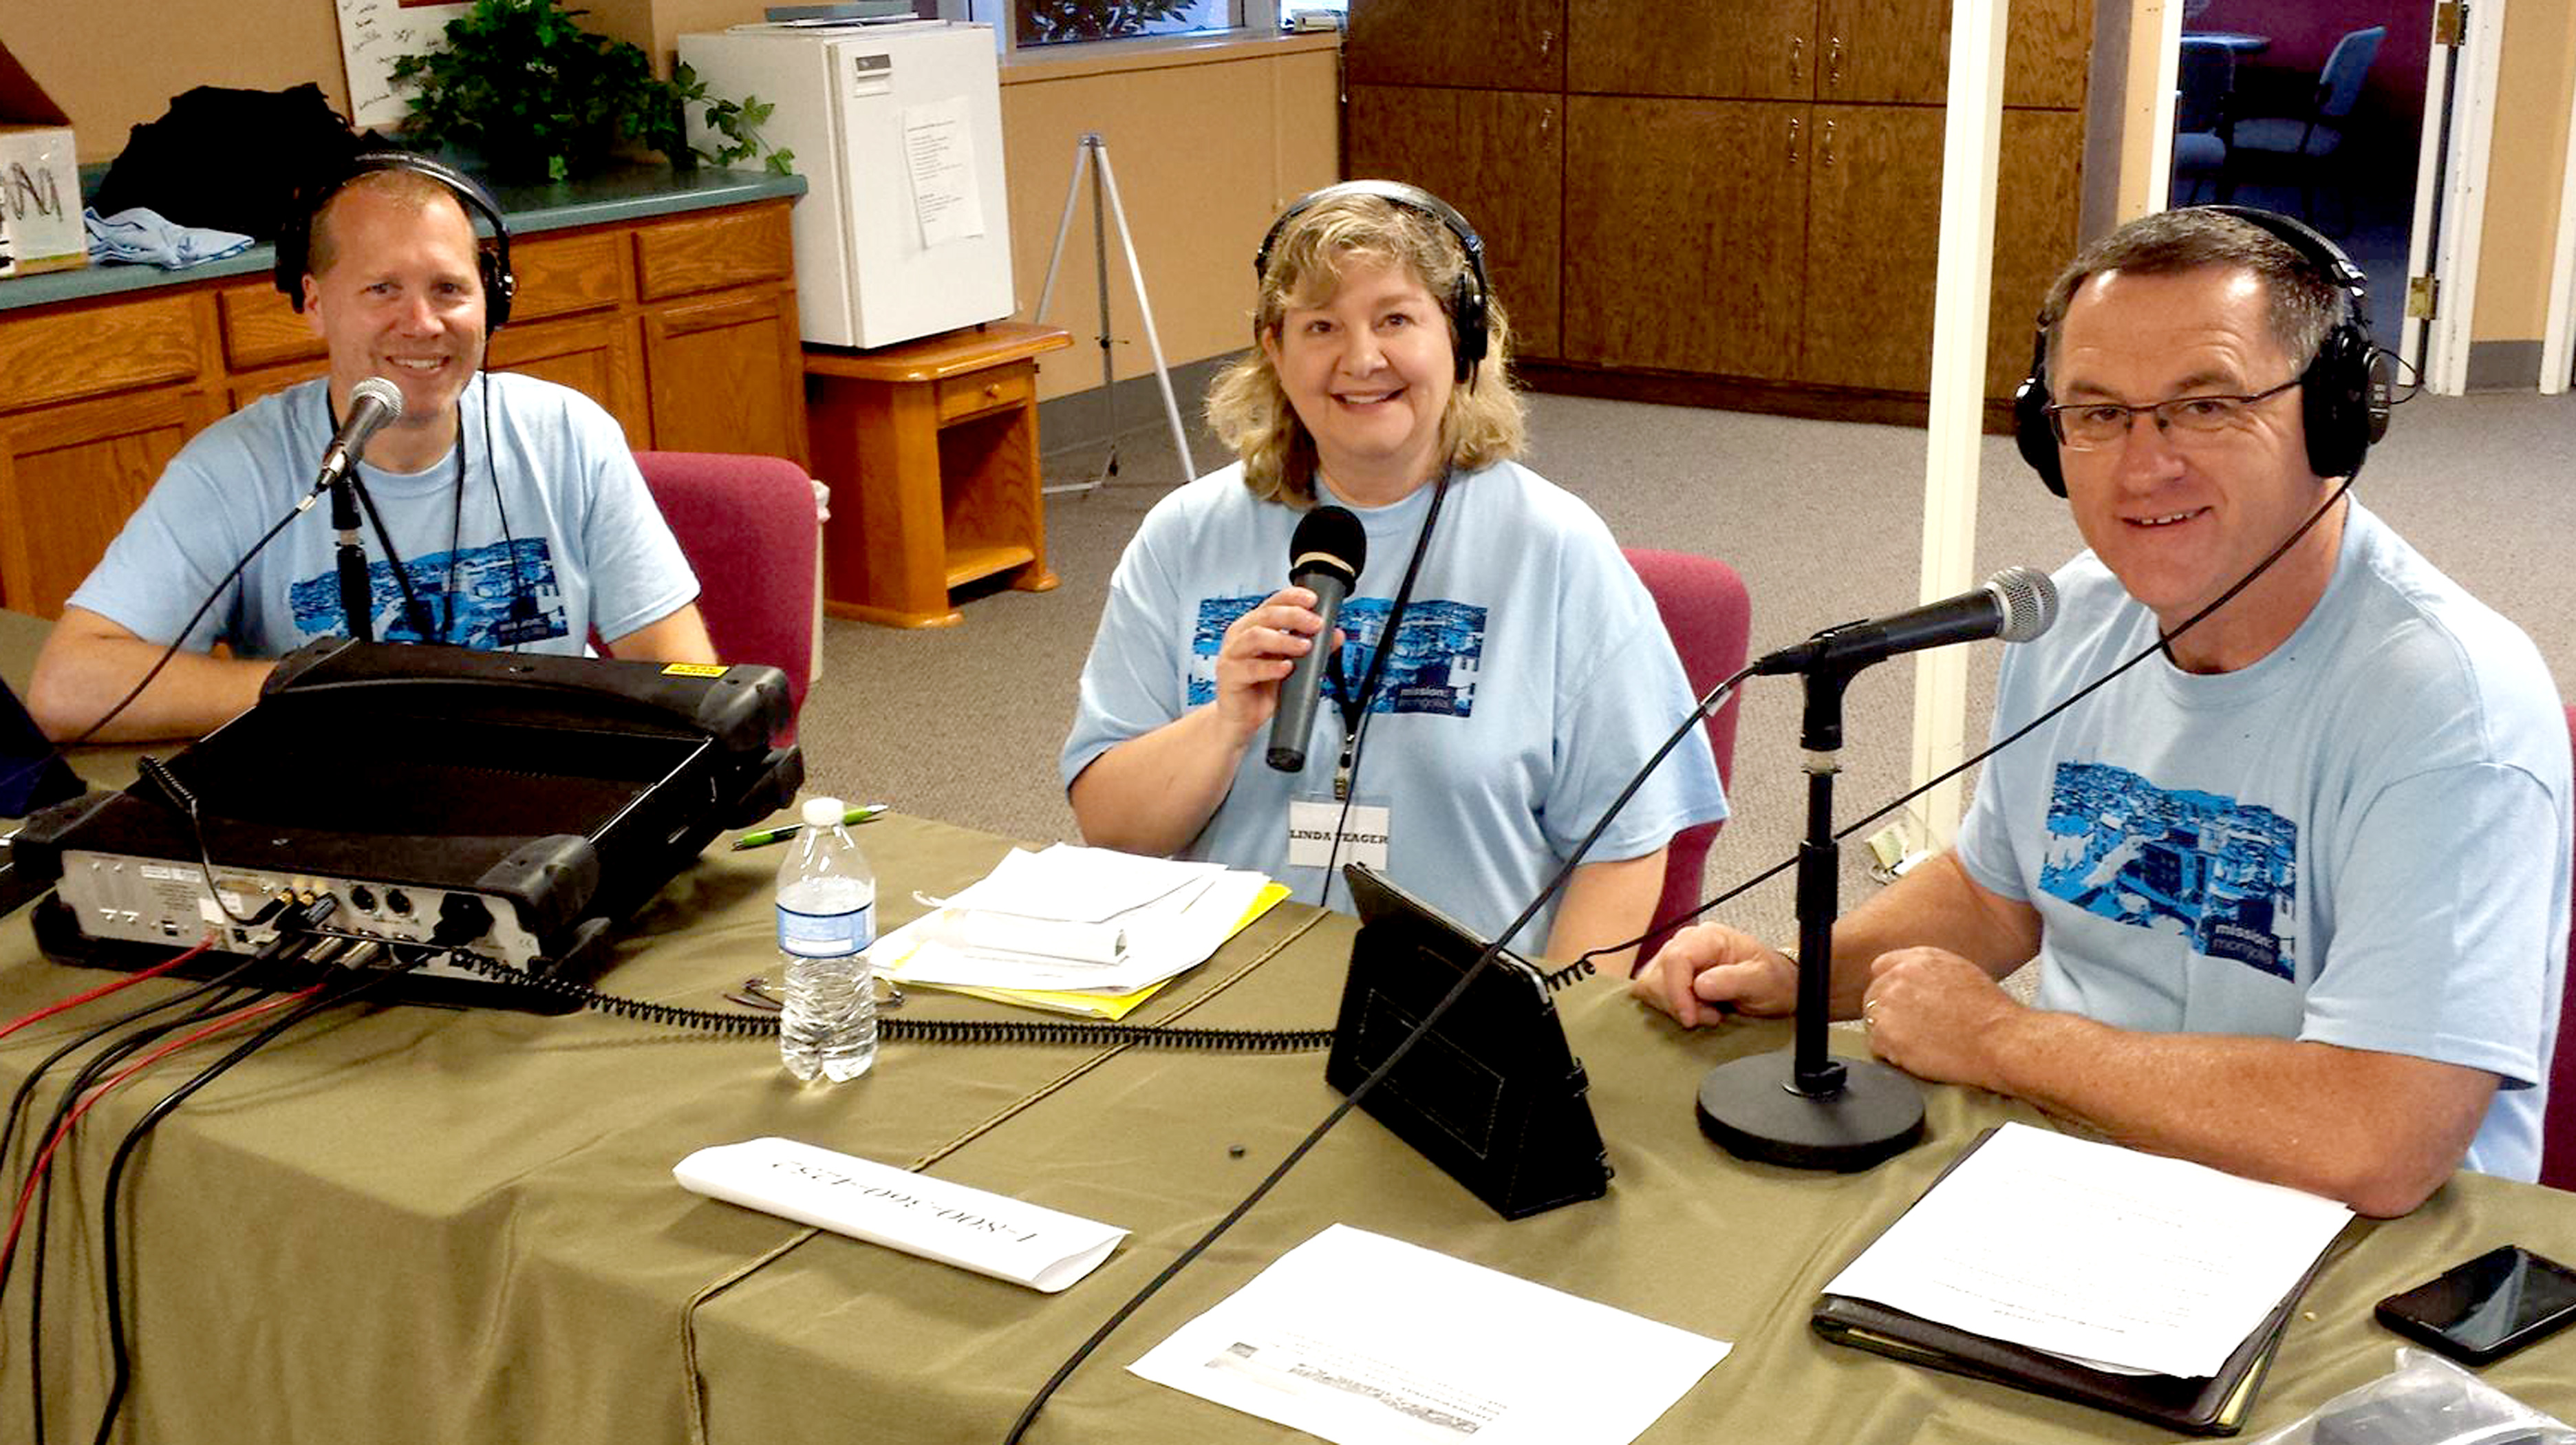 Ray Hashley (left) and Linda Yeager of Moody station WGNR in Indianapolis, Ind., together with Jon Fugler do a live remote from the Reach Beyond Ministry Service Center in Colorado Springs, Colo.